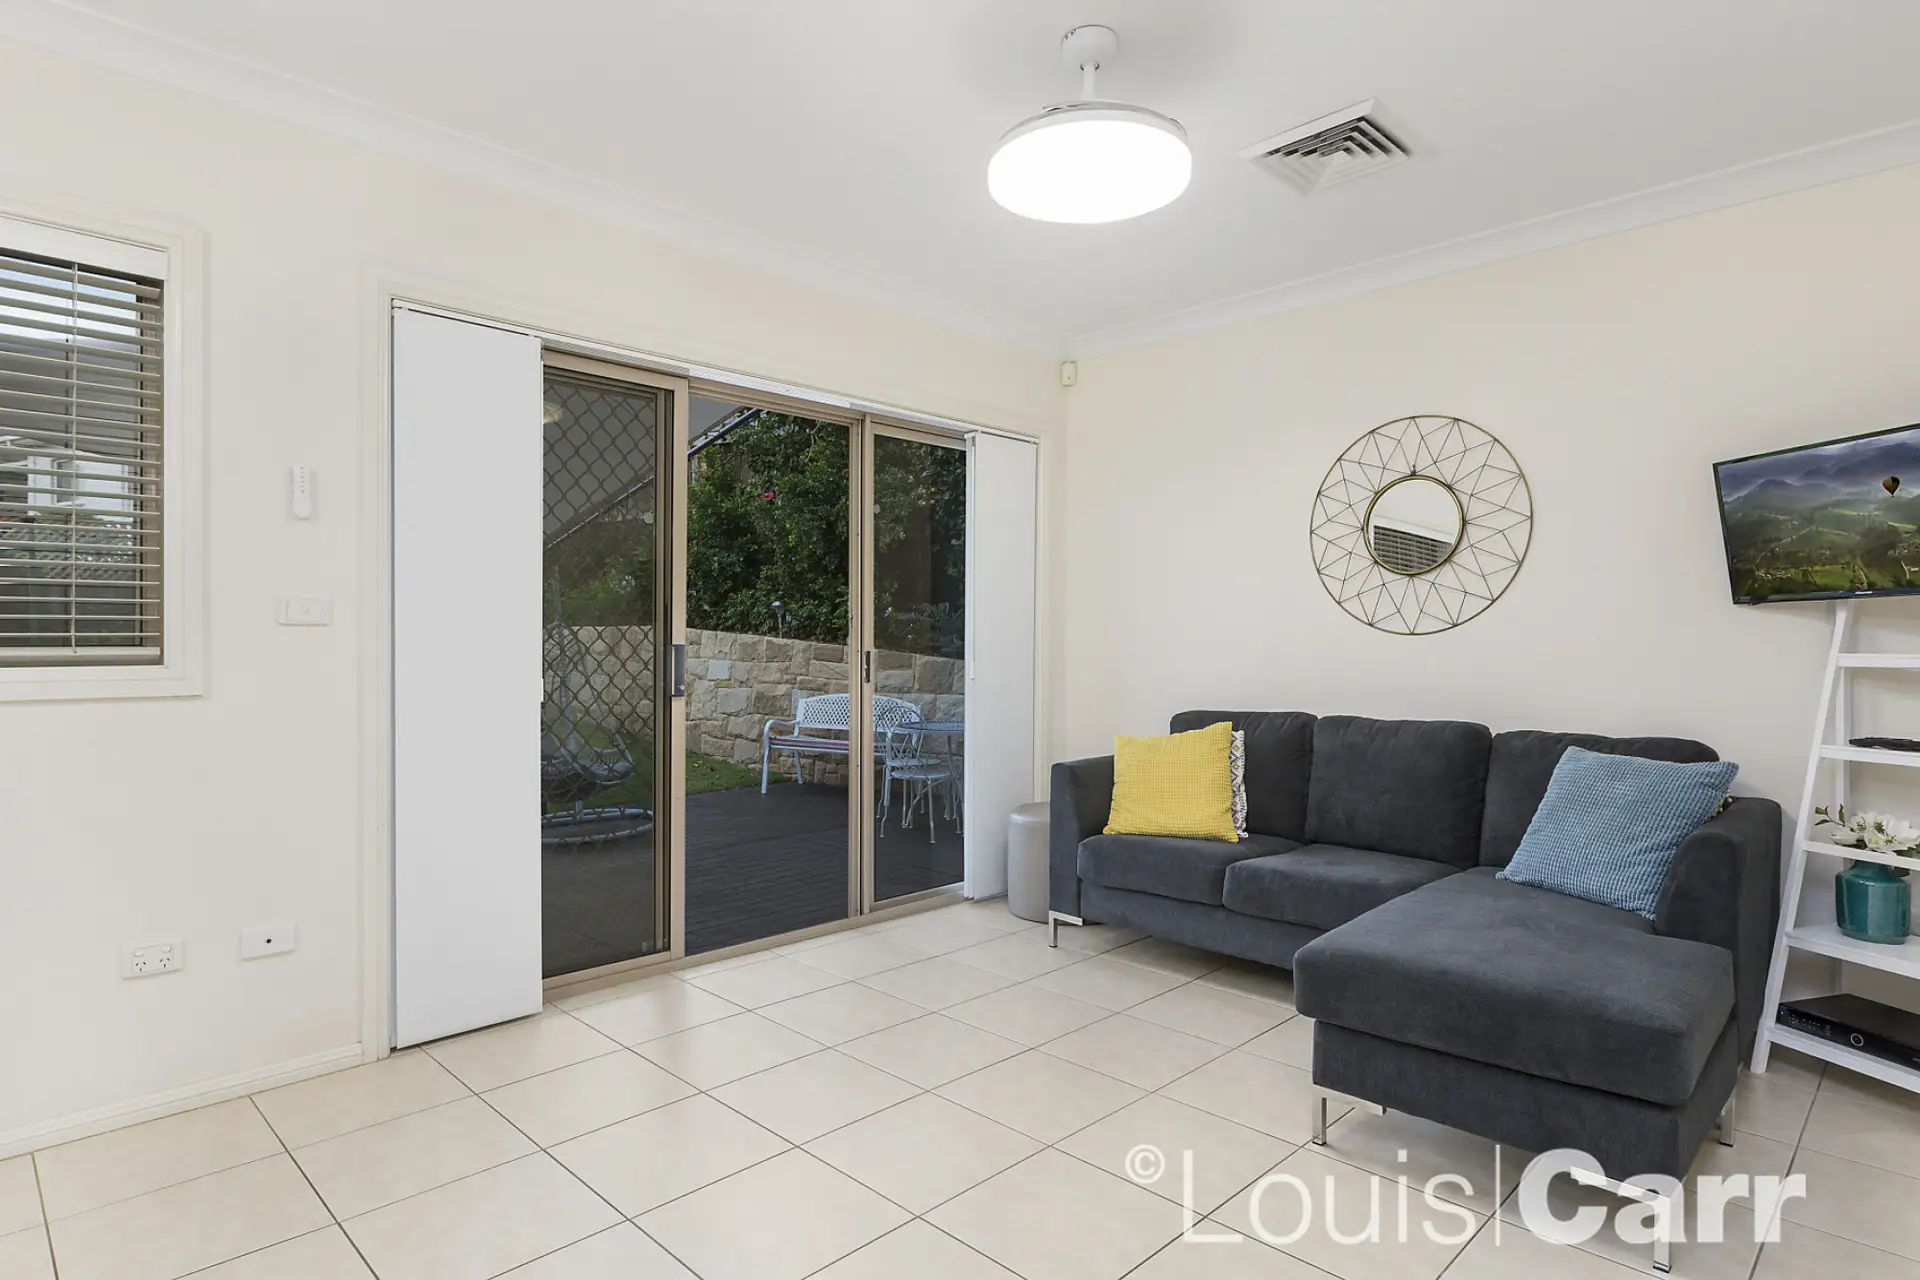 Photo #7: 9 Fullers Road, Glenhaven - Sold by Louis Carr Real Estate